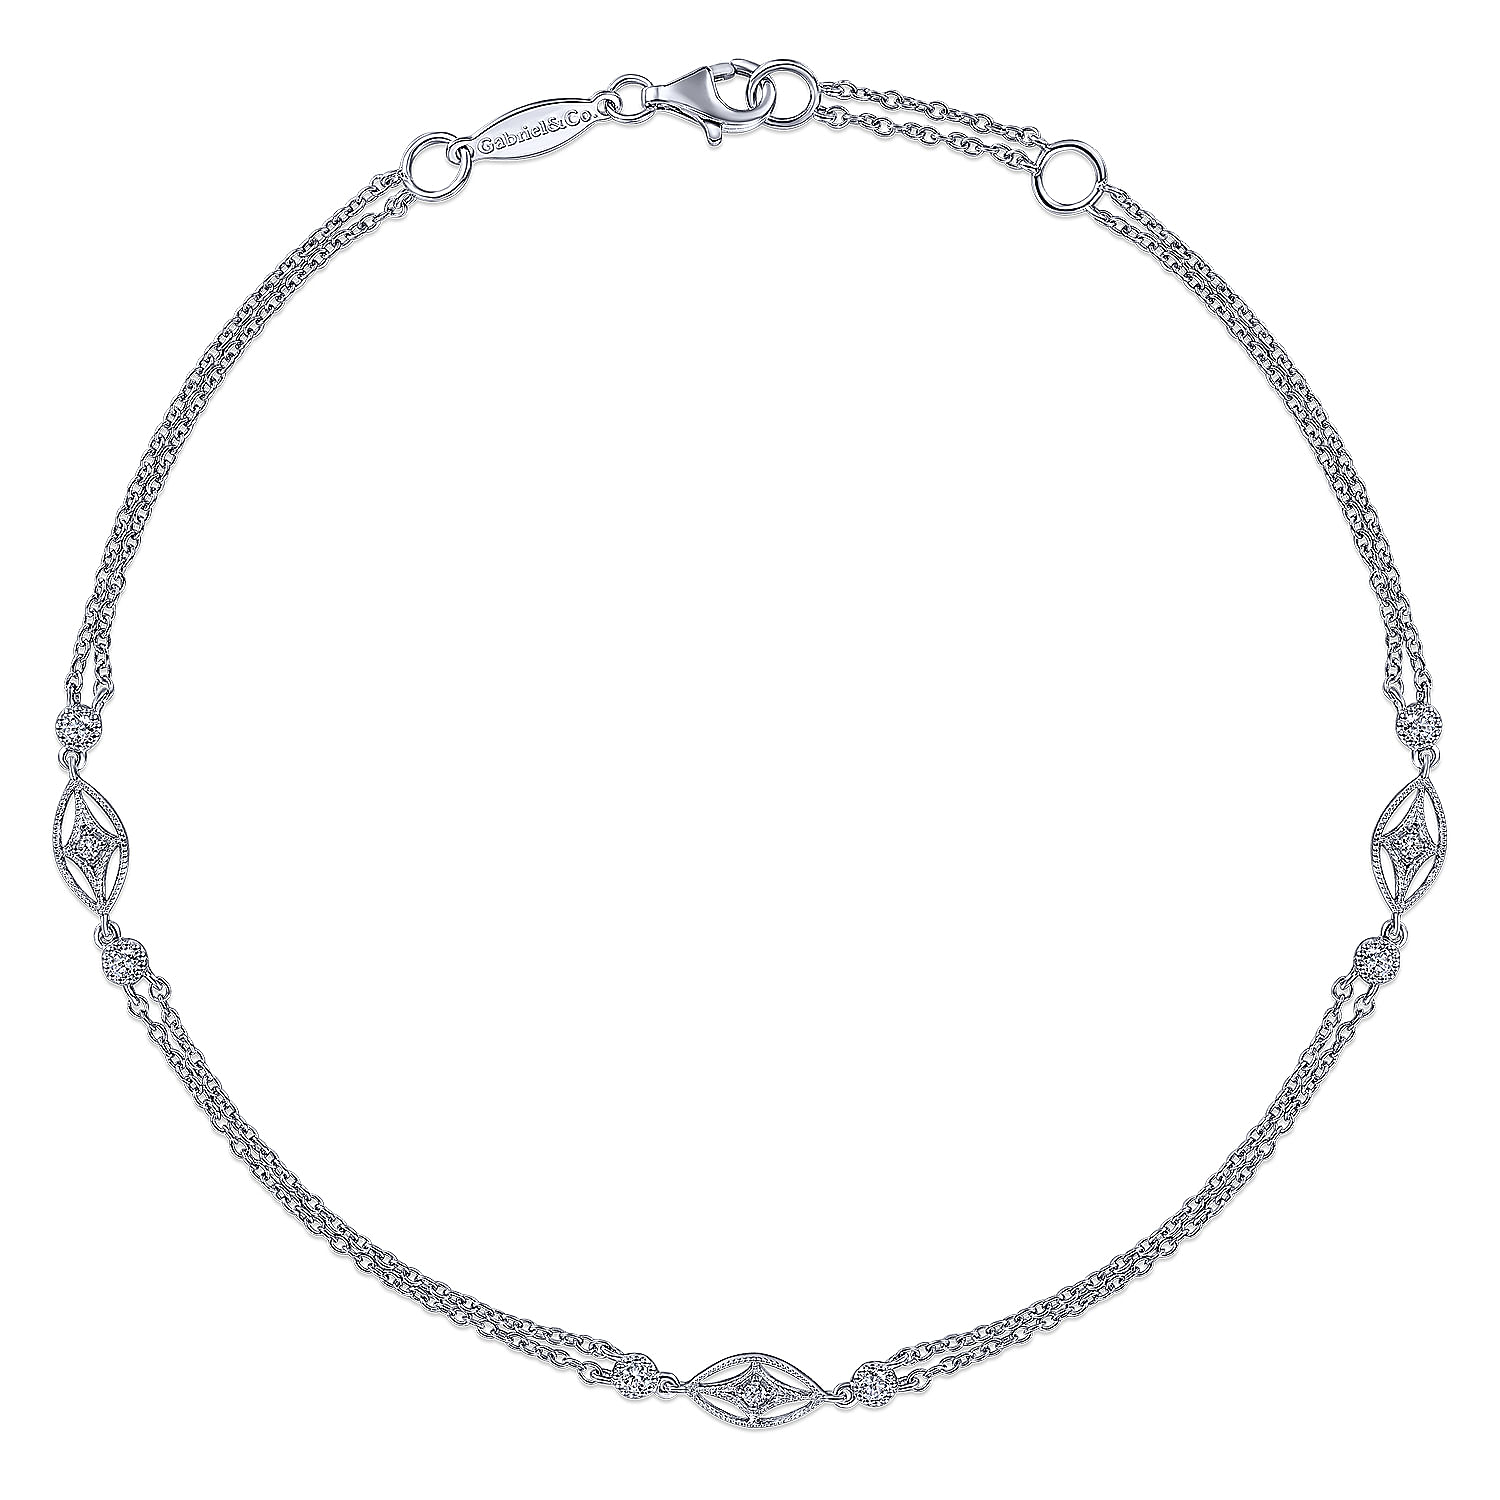 Multi Row 925 Sterling Silver Chain Ankle Bracelet with White Sapphire Marquise Stations